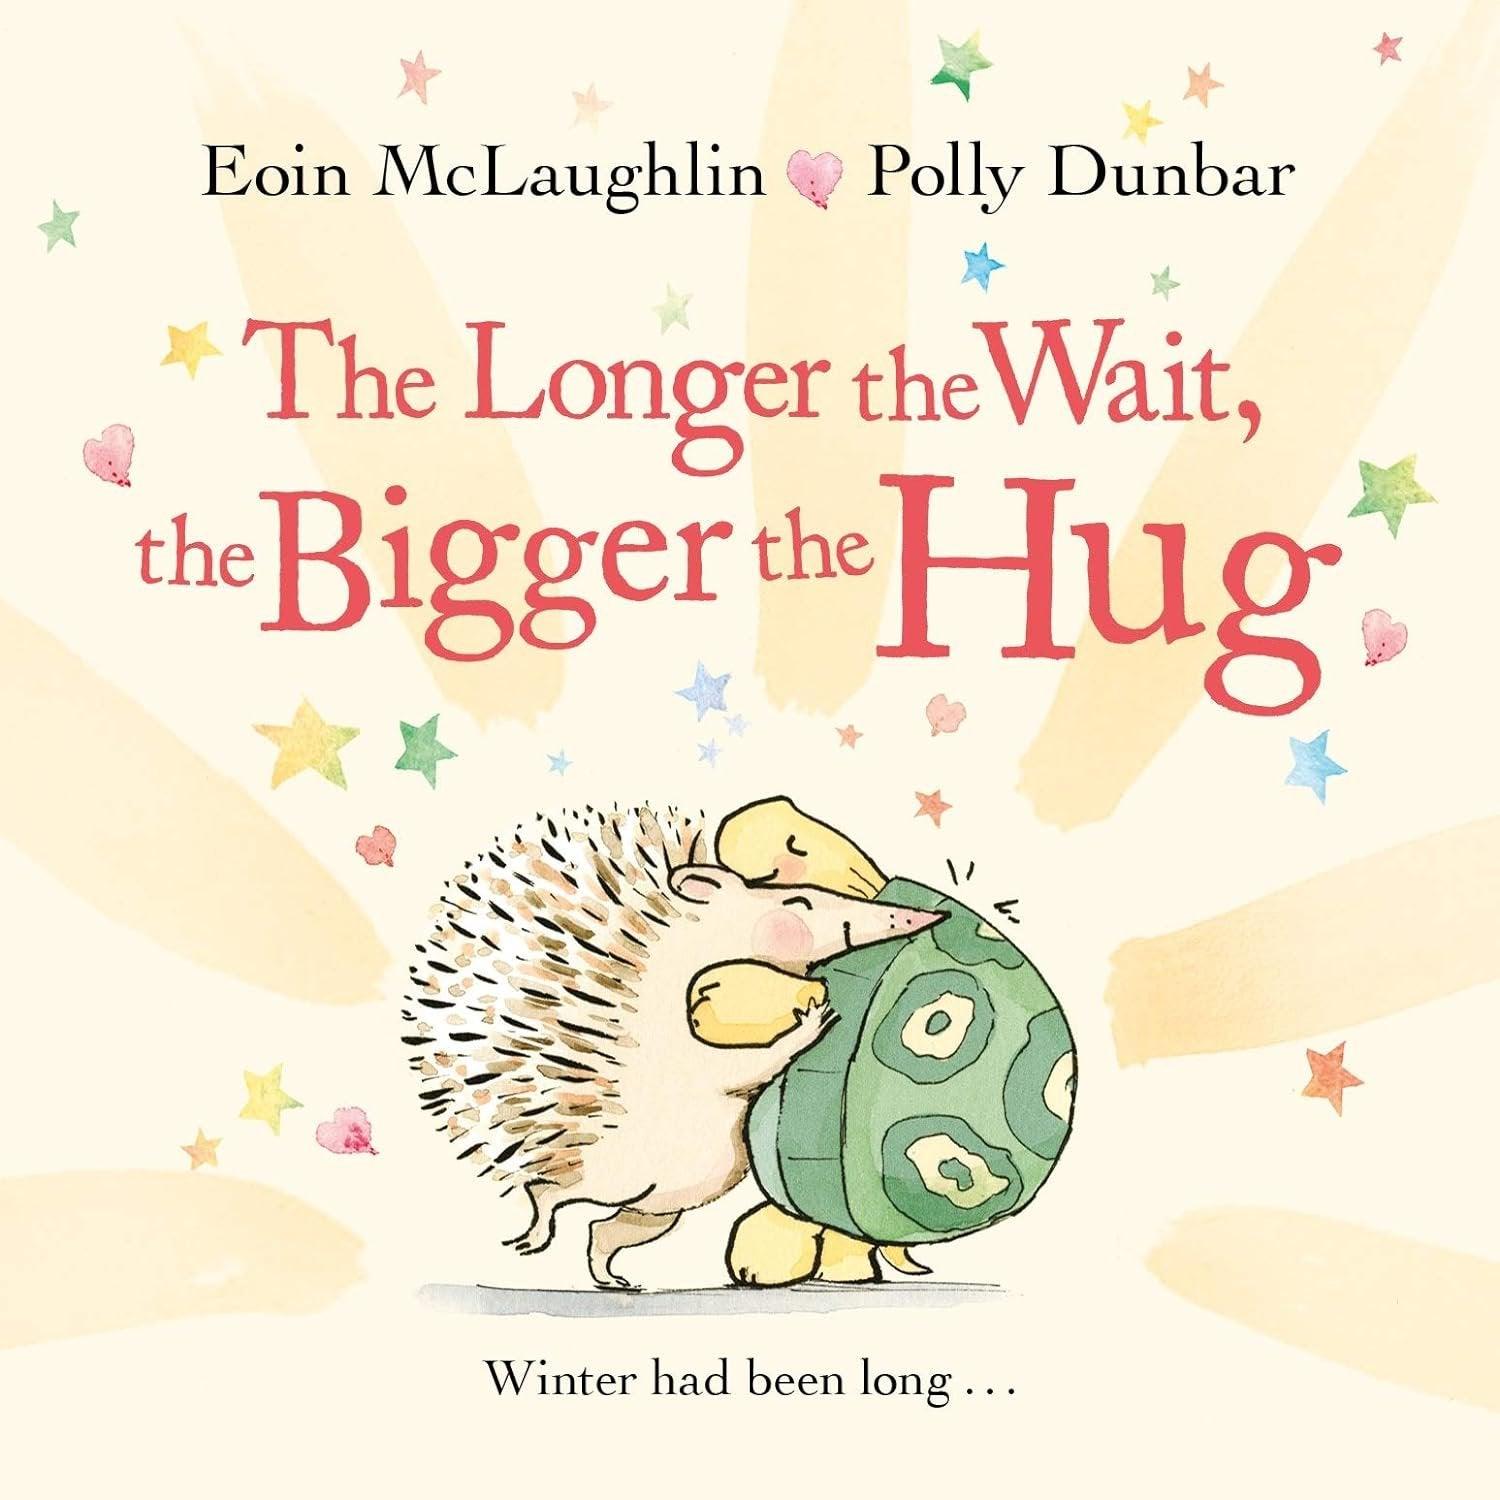 Illustration of a book cover displaying socially distanced characters, a hedgehog and a tortoise, titled "The Longer the Wait, the Bigger the Hug: Mini Gift Edition (Hedgehog & Friends)" by Eoin McLaughlin (Author) and Polly